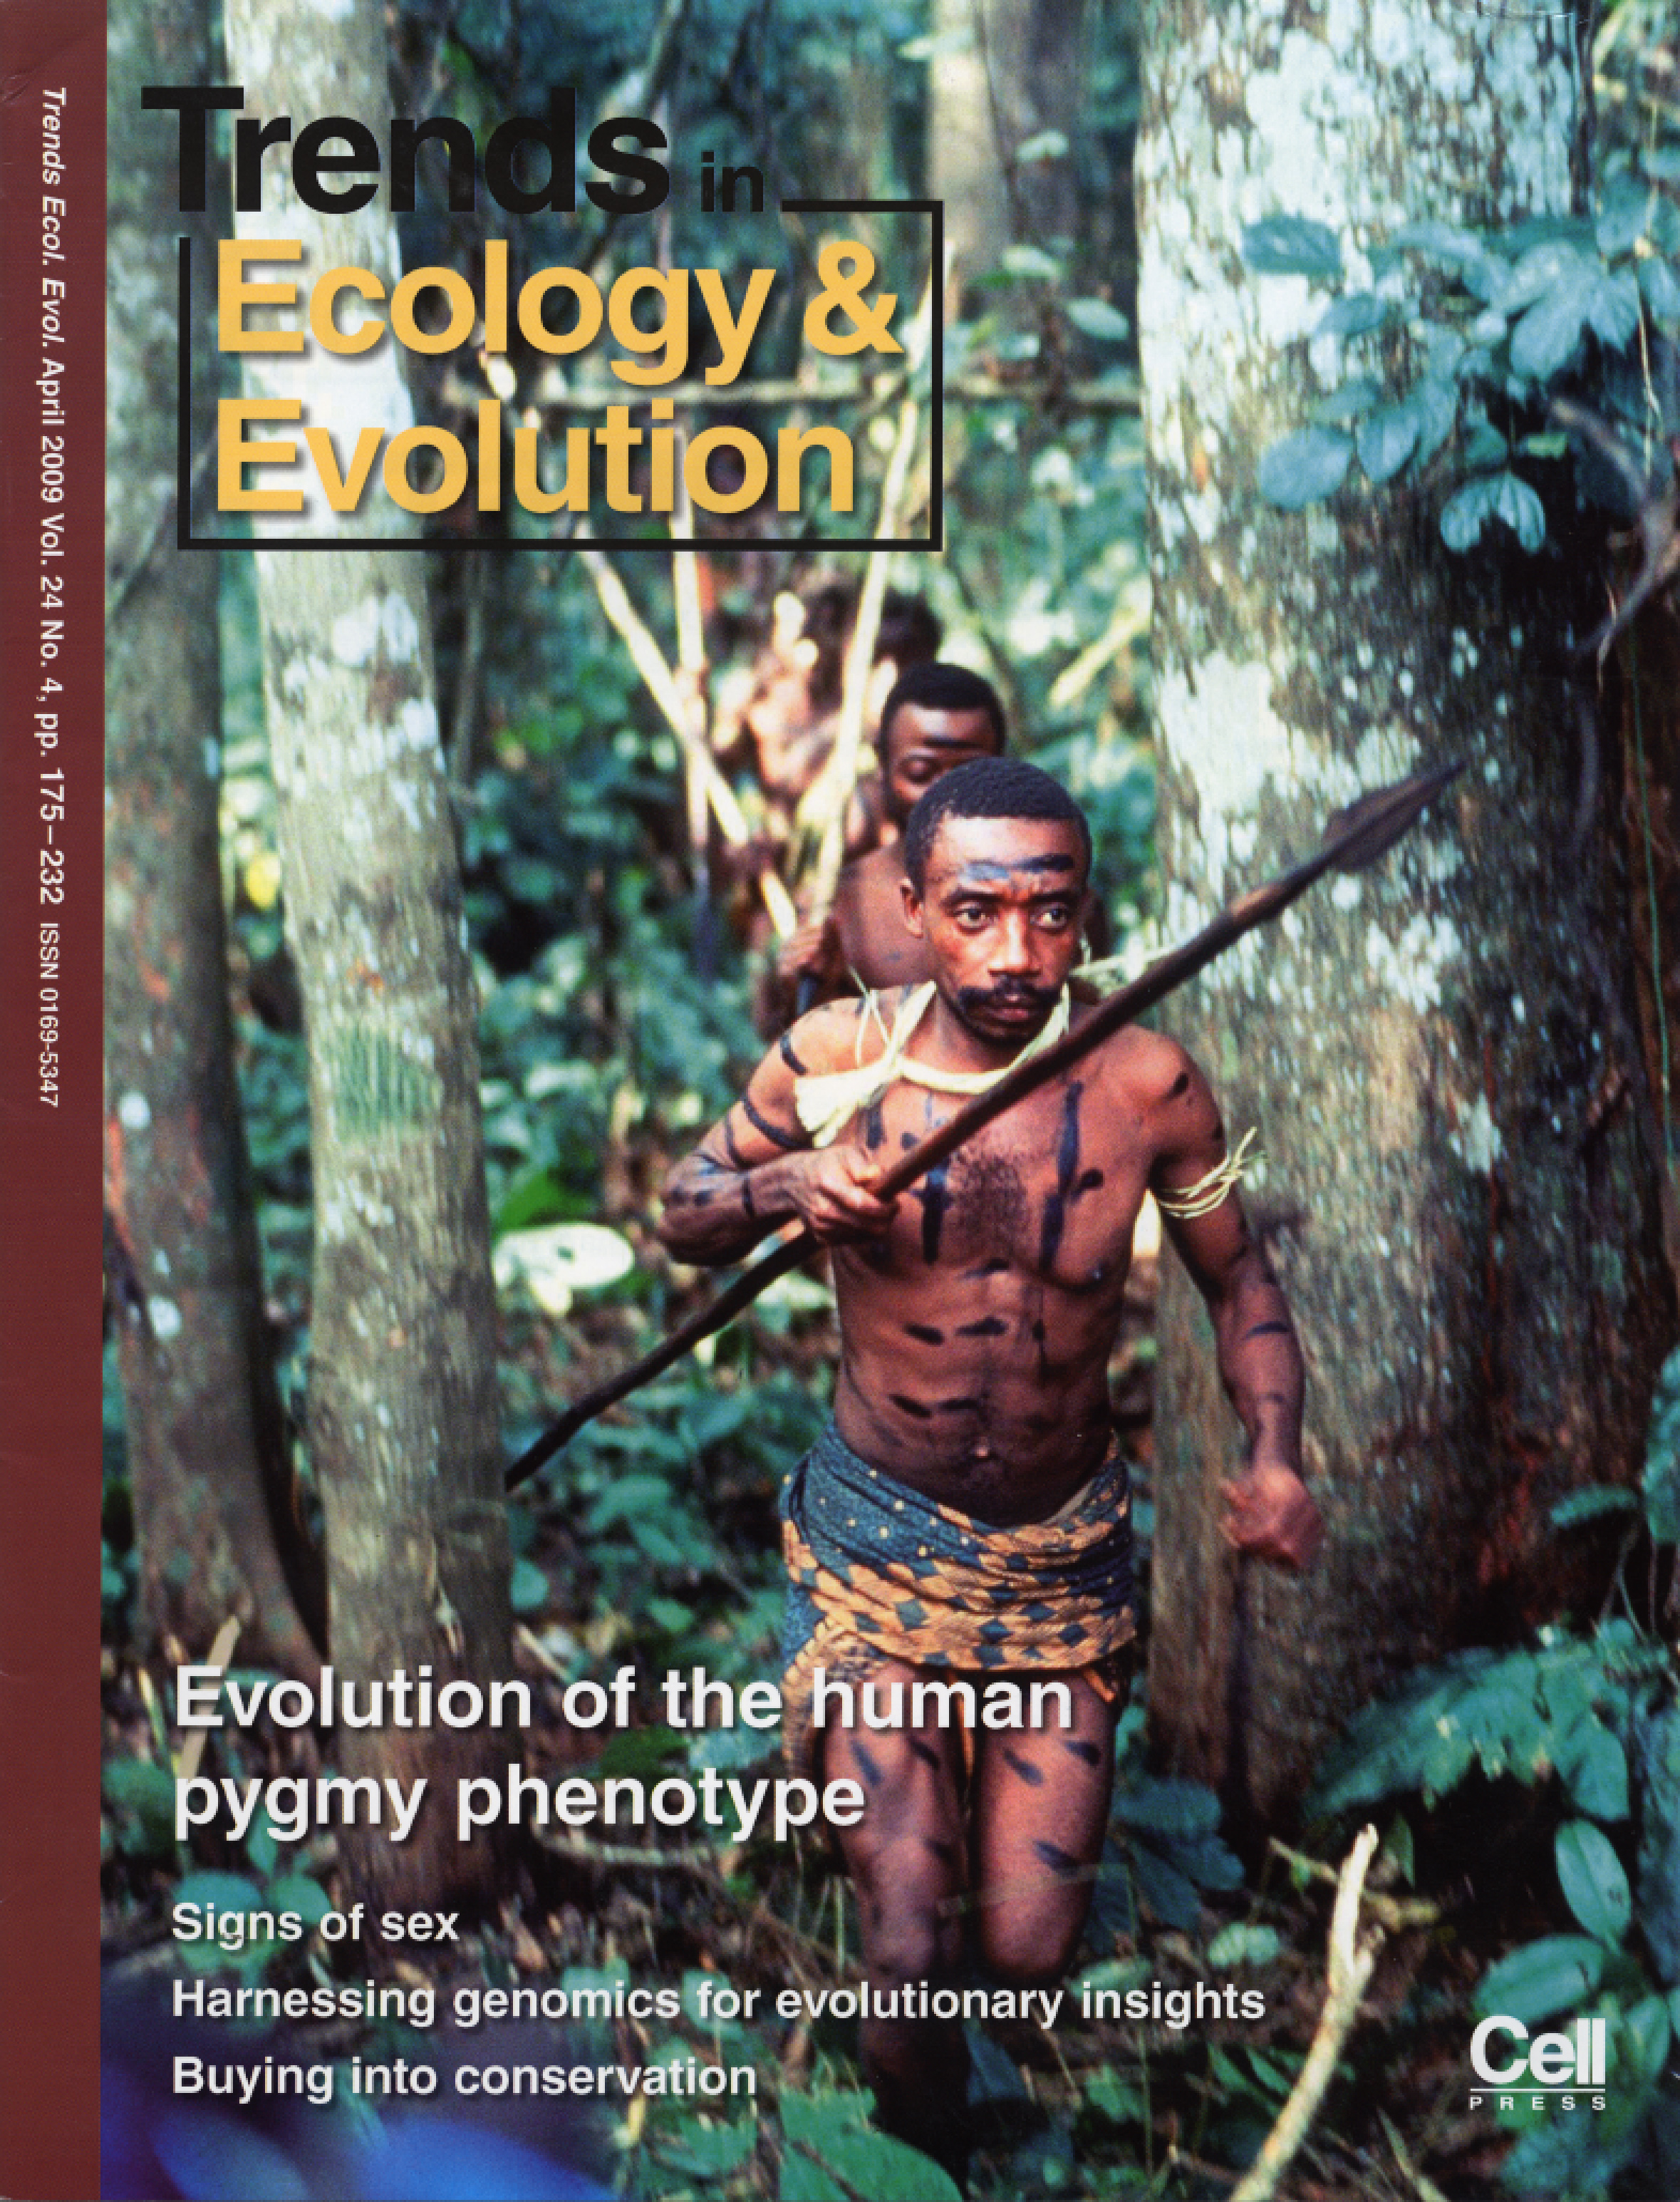   Trends in Ecology and Evolution  cover for  Perry &amp; Dominy (2009) . 